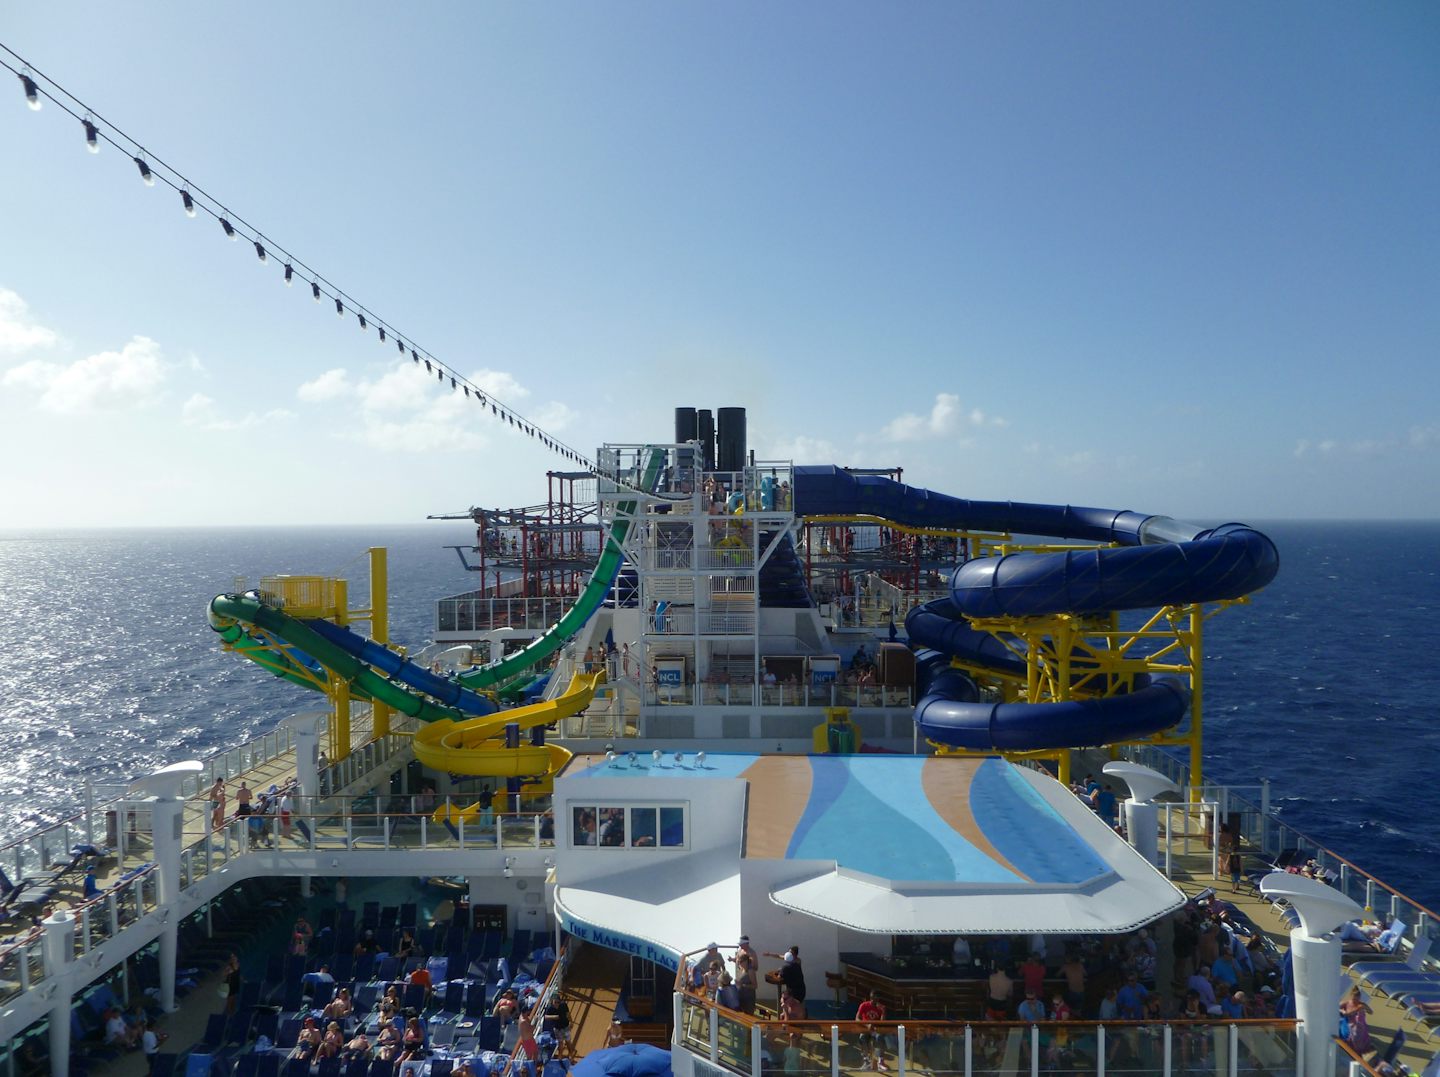 View of the waterslides on the ship.